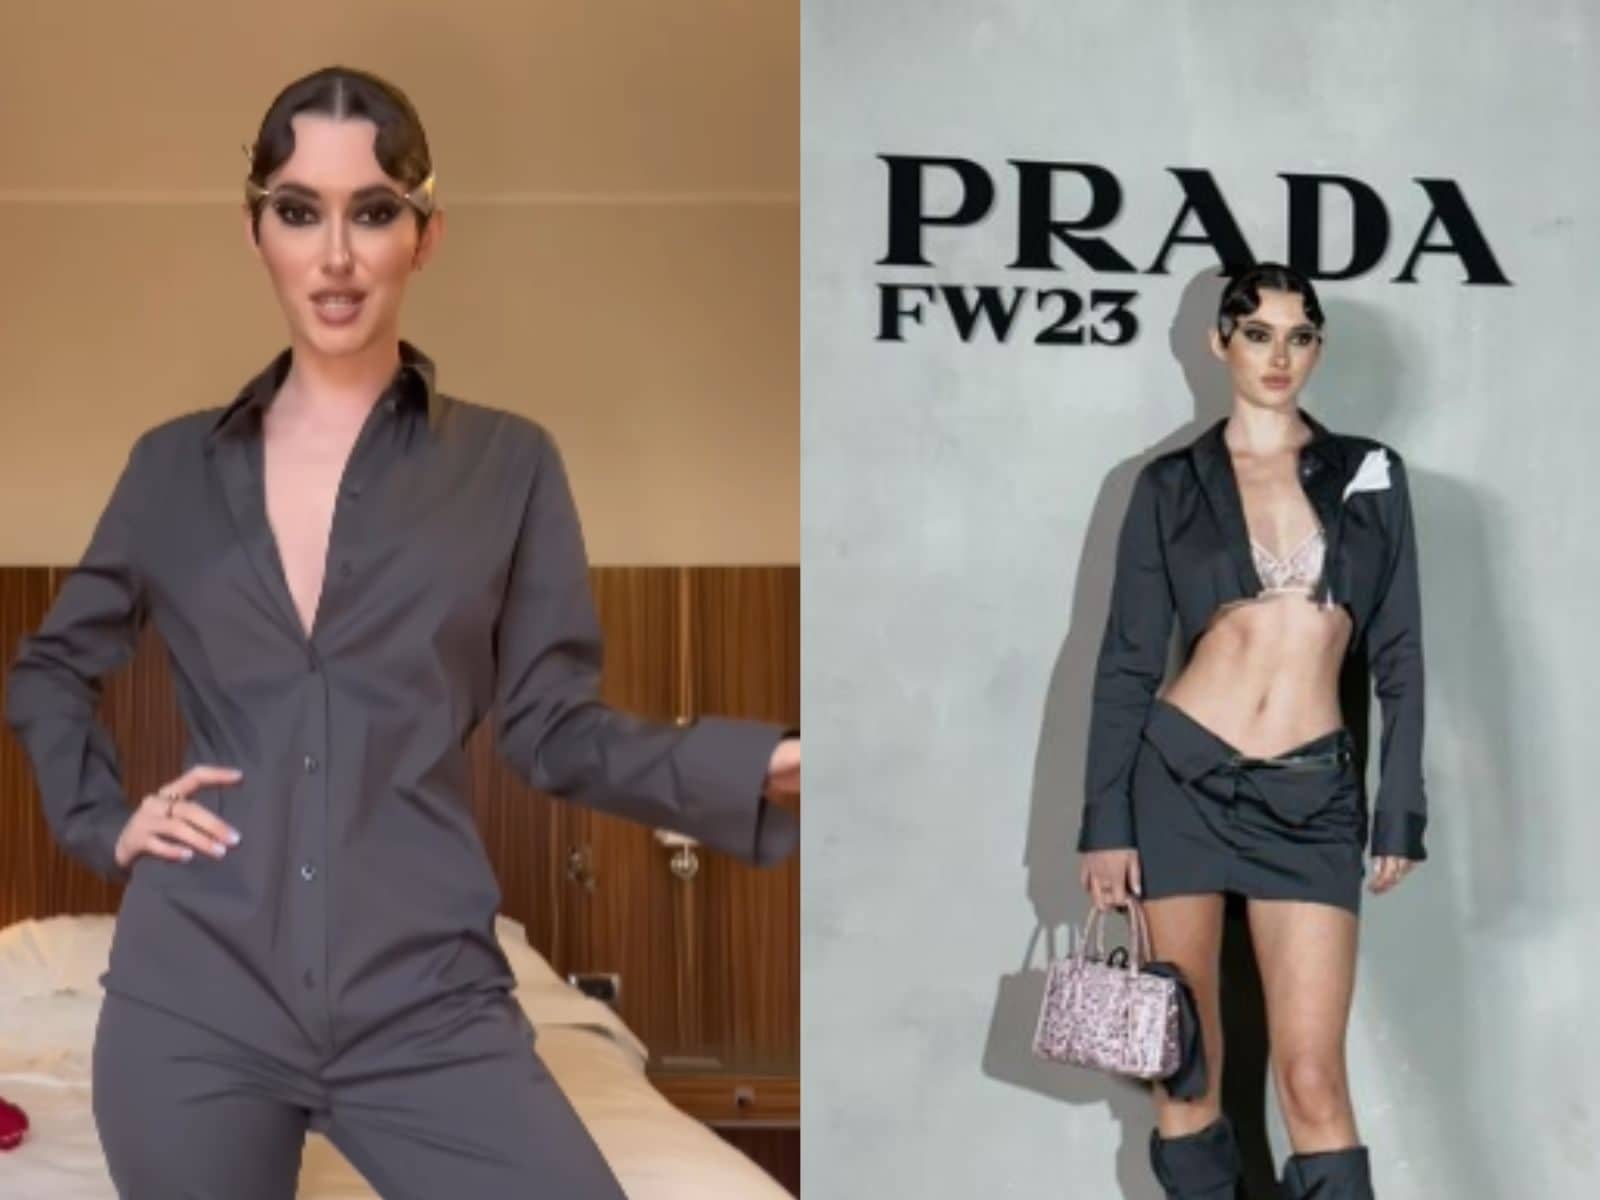 The Price of Prada in South Africa